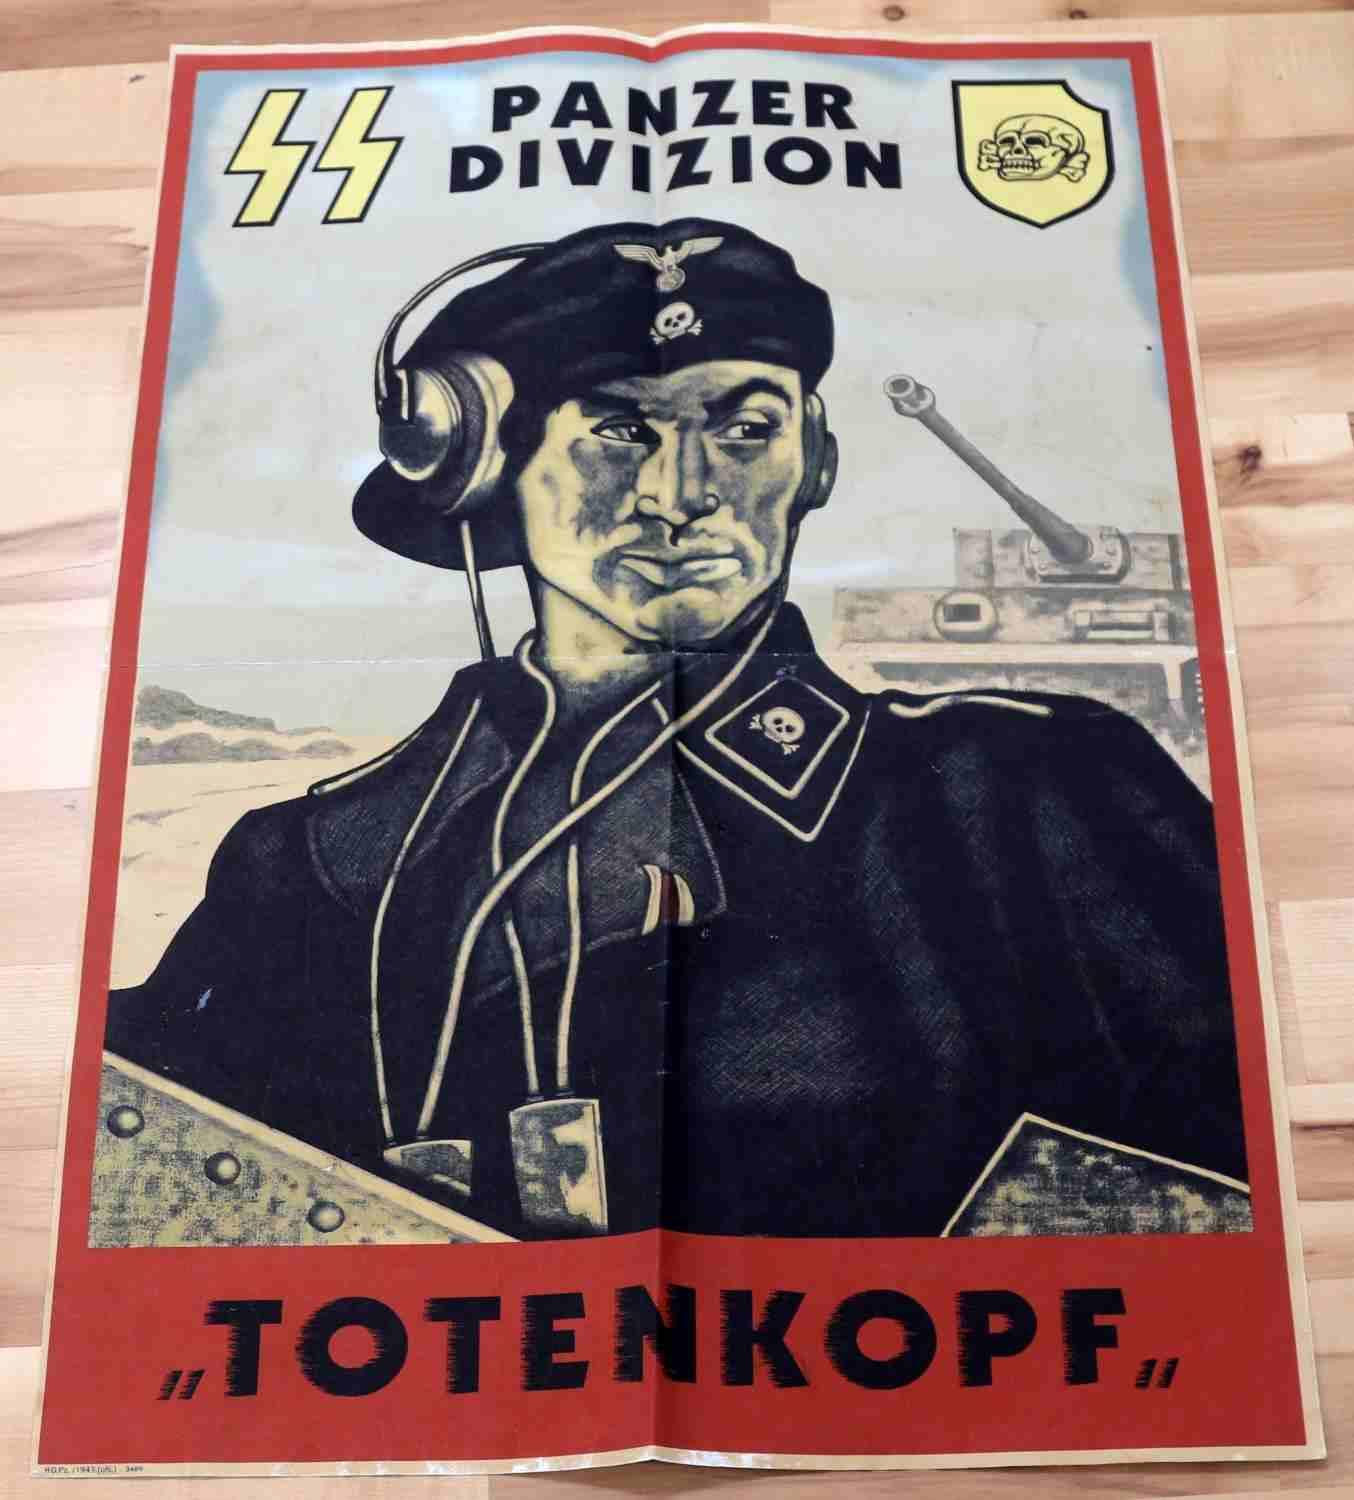 WWII GERMAN SS PANZER DIVISION TOTENKOPF POSTER